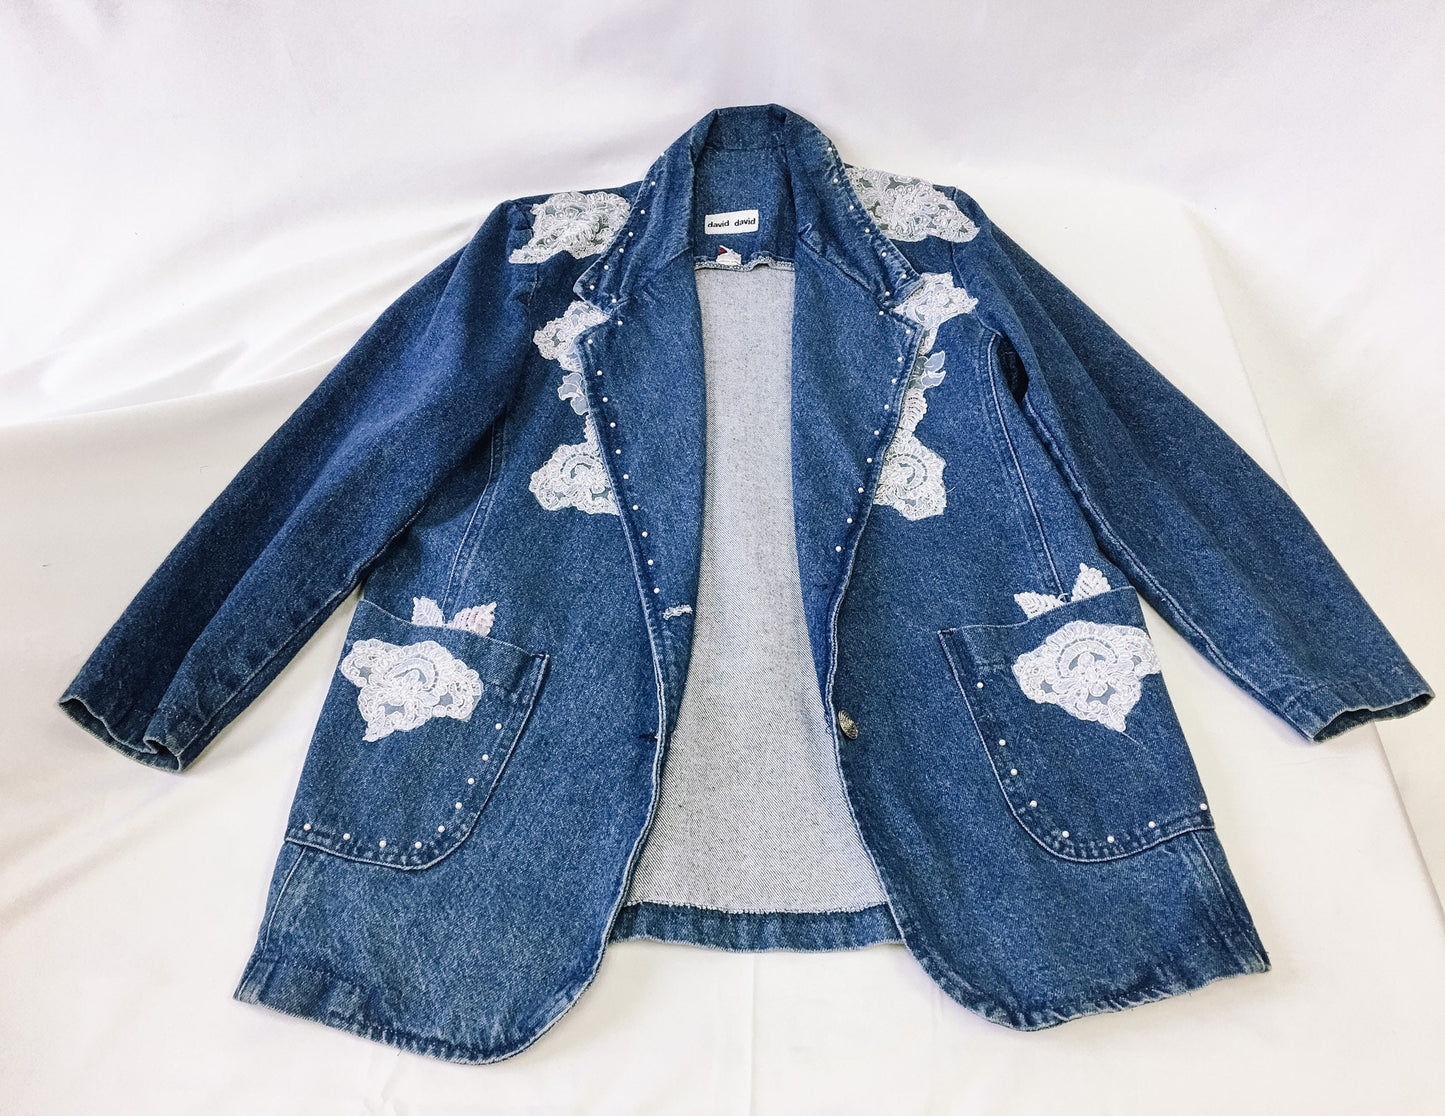 Vintage David David Denim Jacket Blazer with Lace and Pearl Details, Sz. M, Made in USA